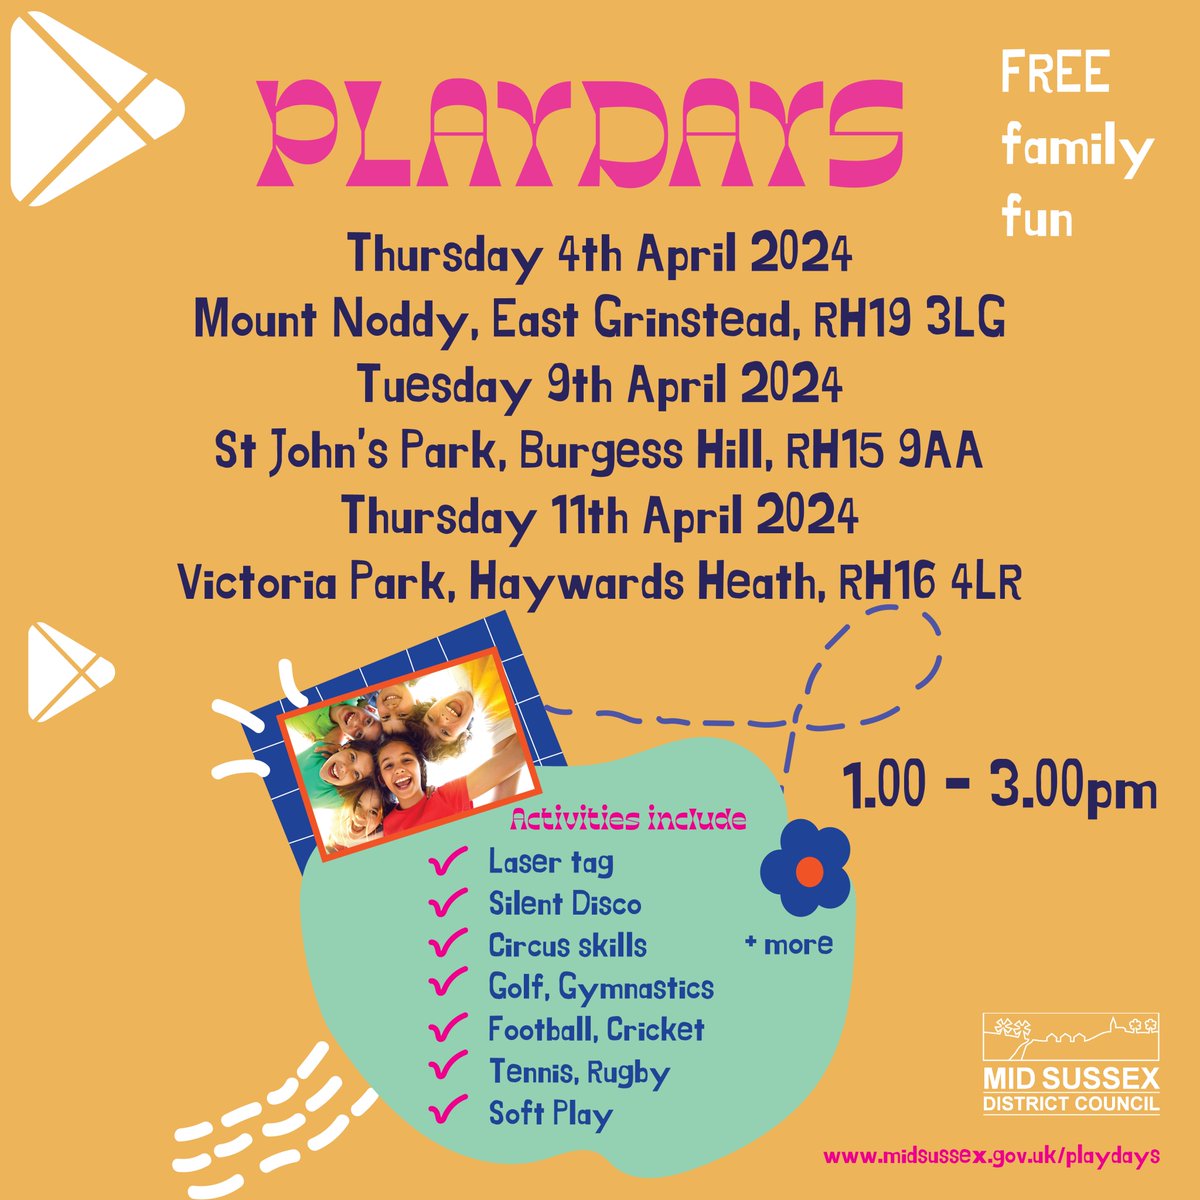 Exciting news! Our FREE play days are back this Easter across the district! Don't miss out on the action-packed Easter festivities! Find out more: midsussex.gov.uk/.../mid-sussex…